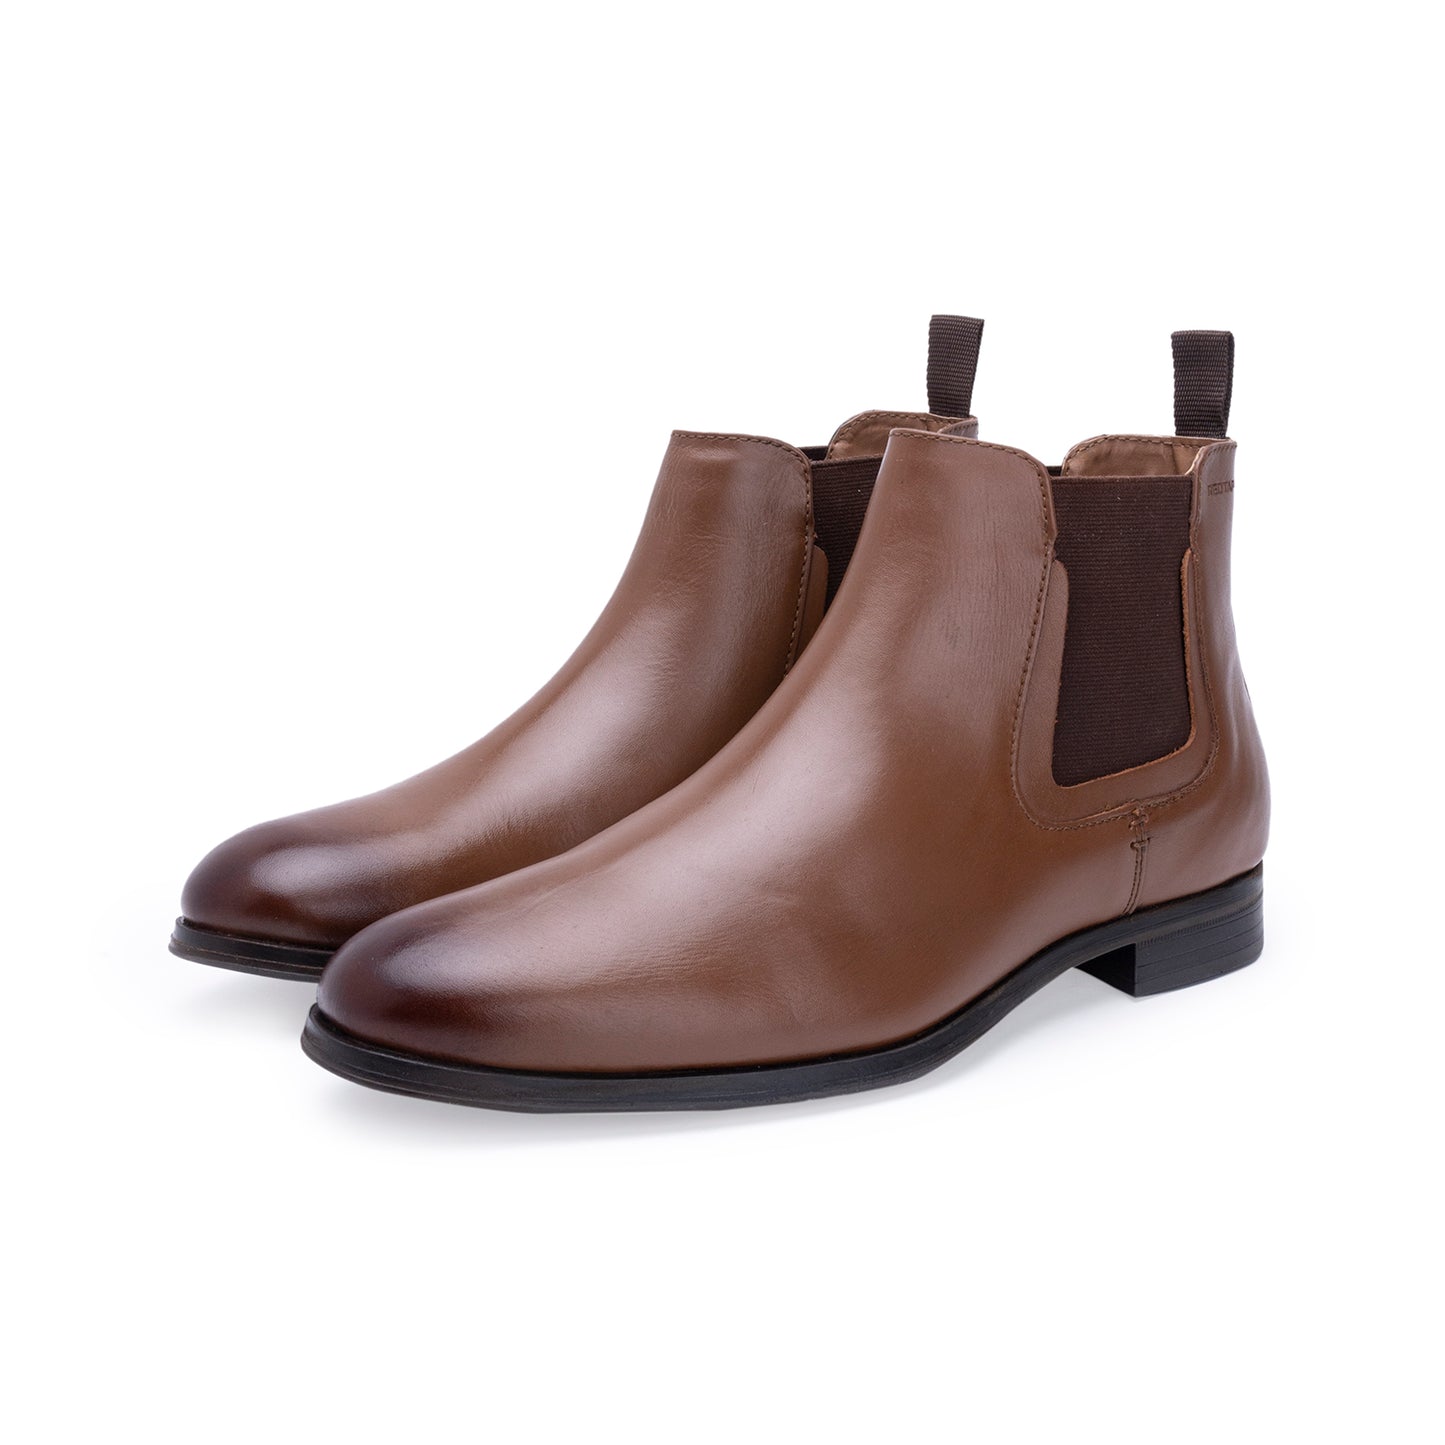 RedTape Men Tan Genuine Leather Ankle Length Boots